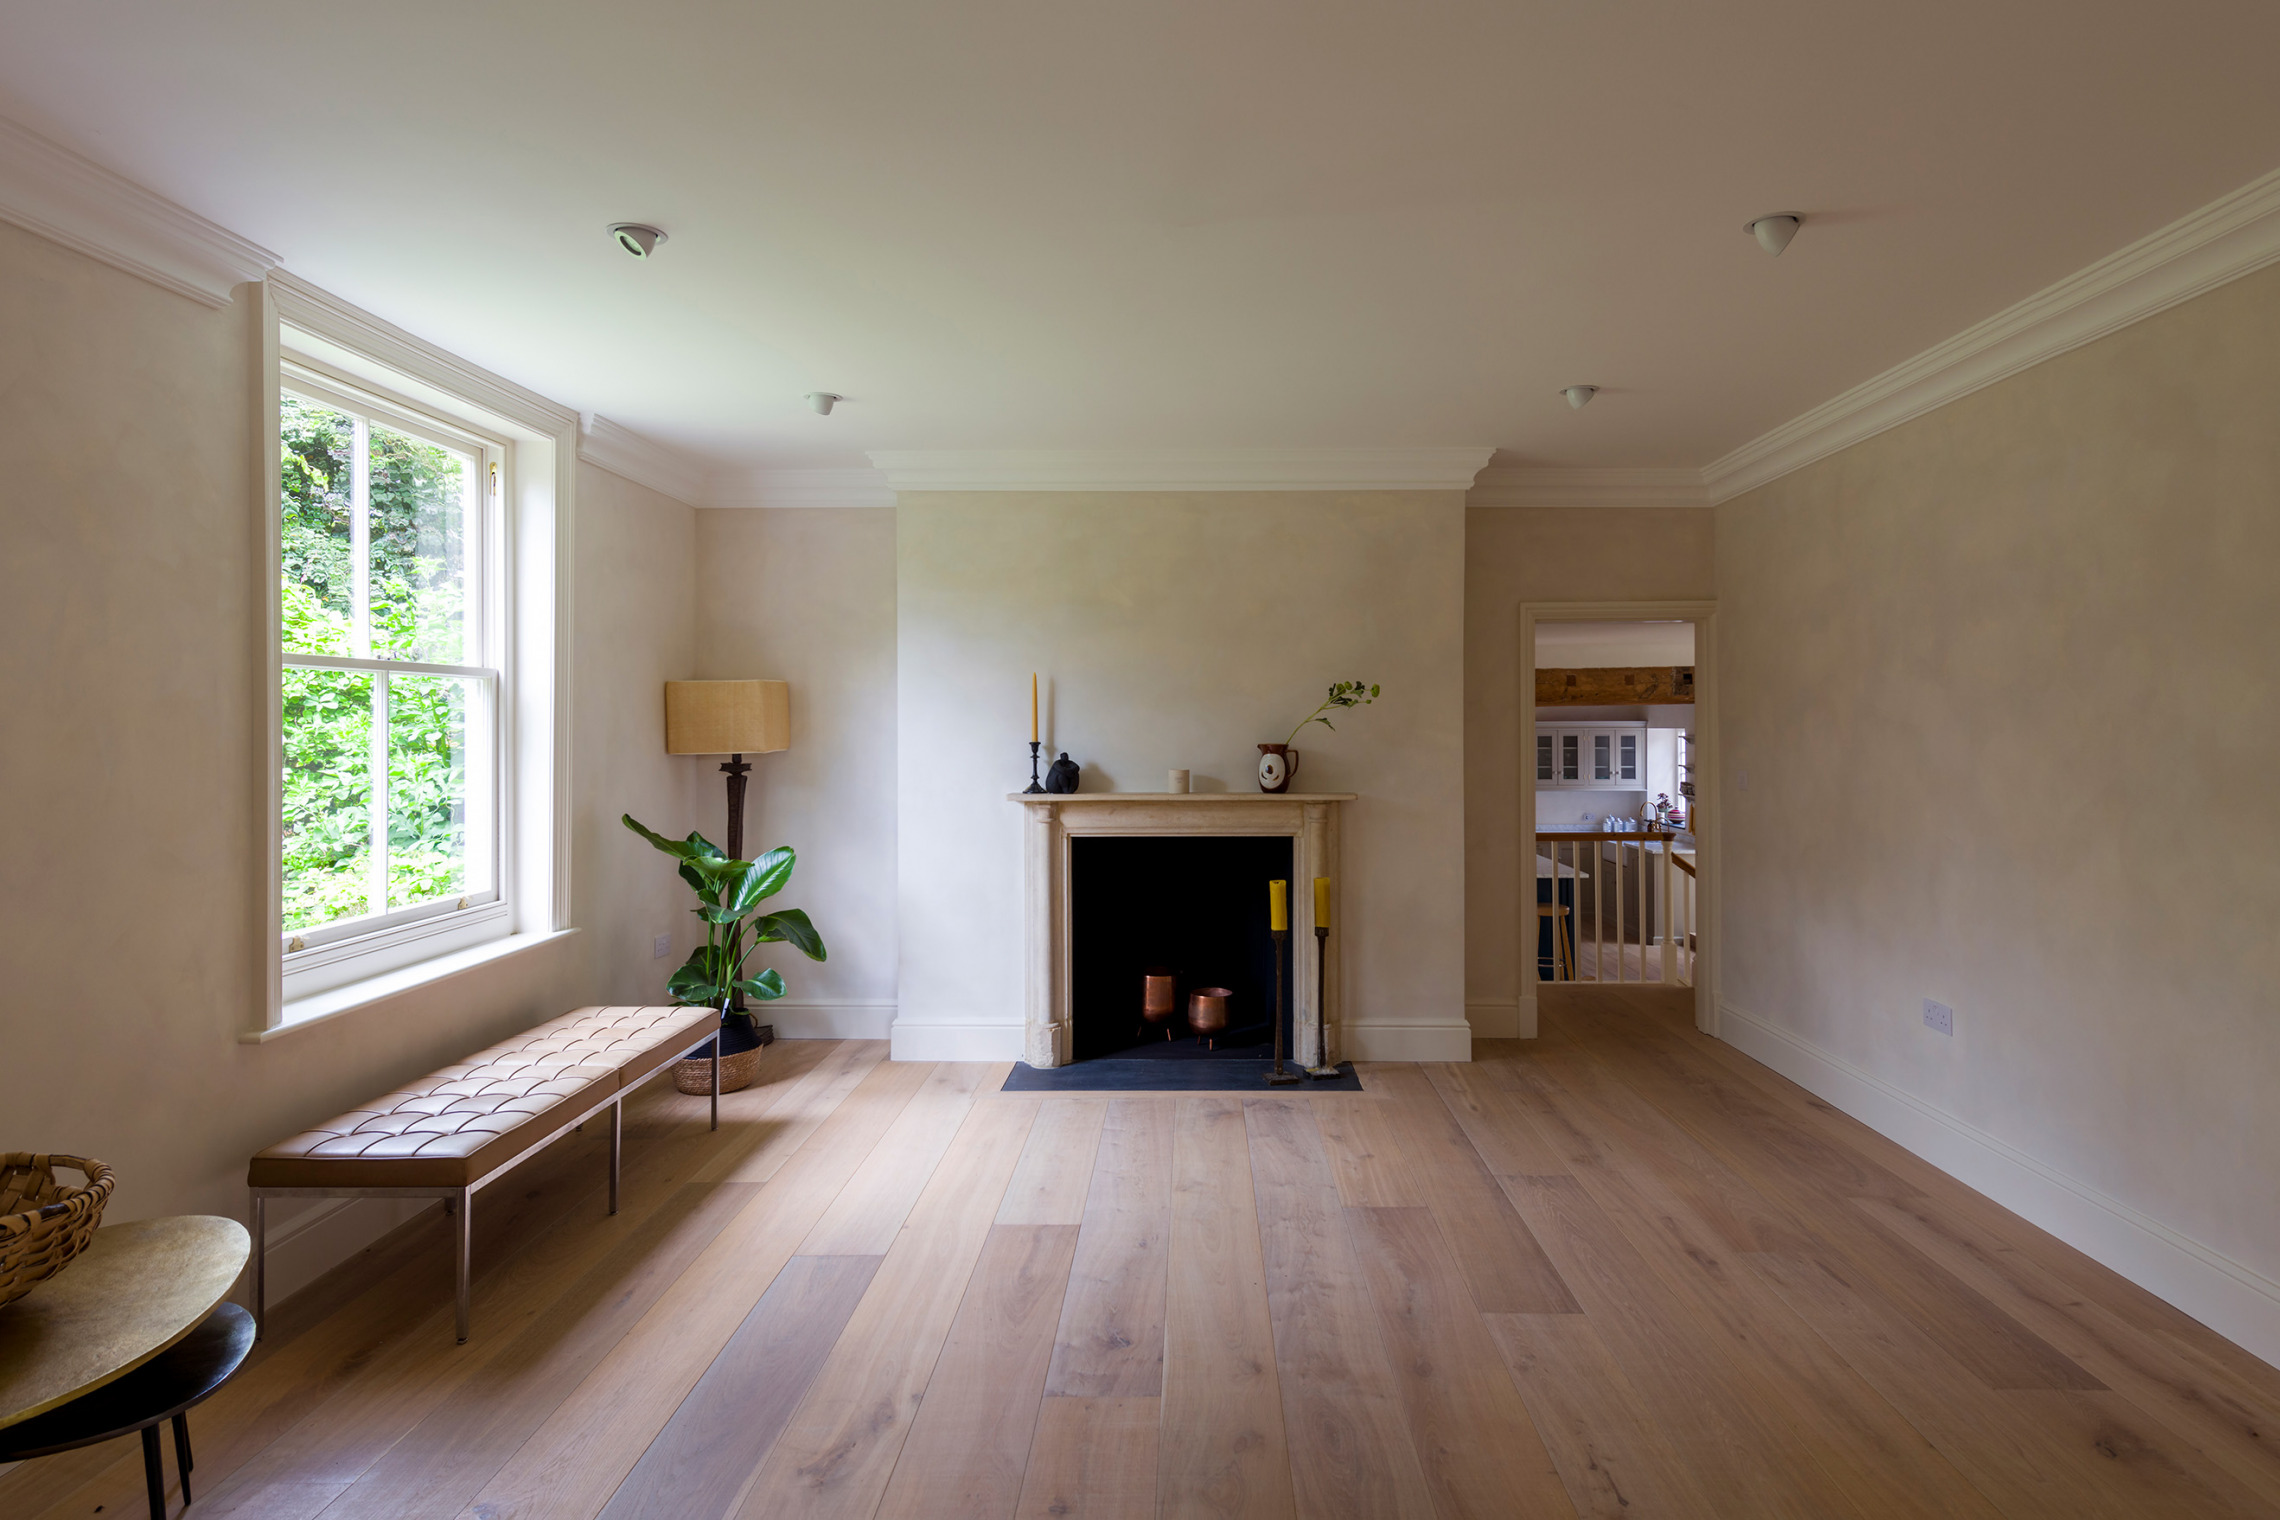 Smoked, Sawn and White Oiled oak flooring at Black Tile House